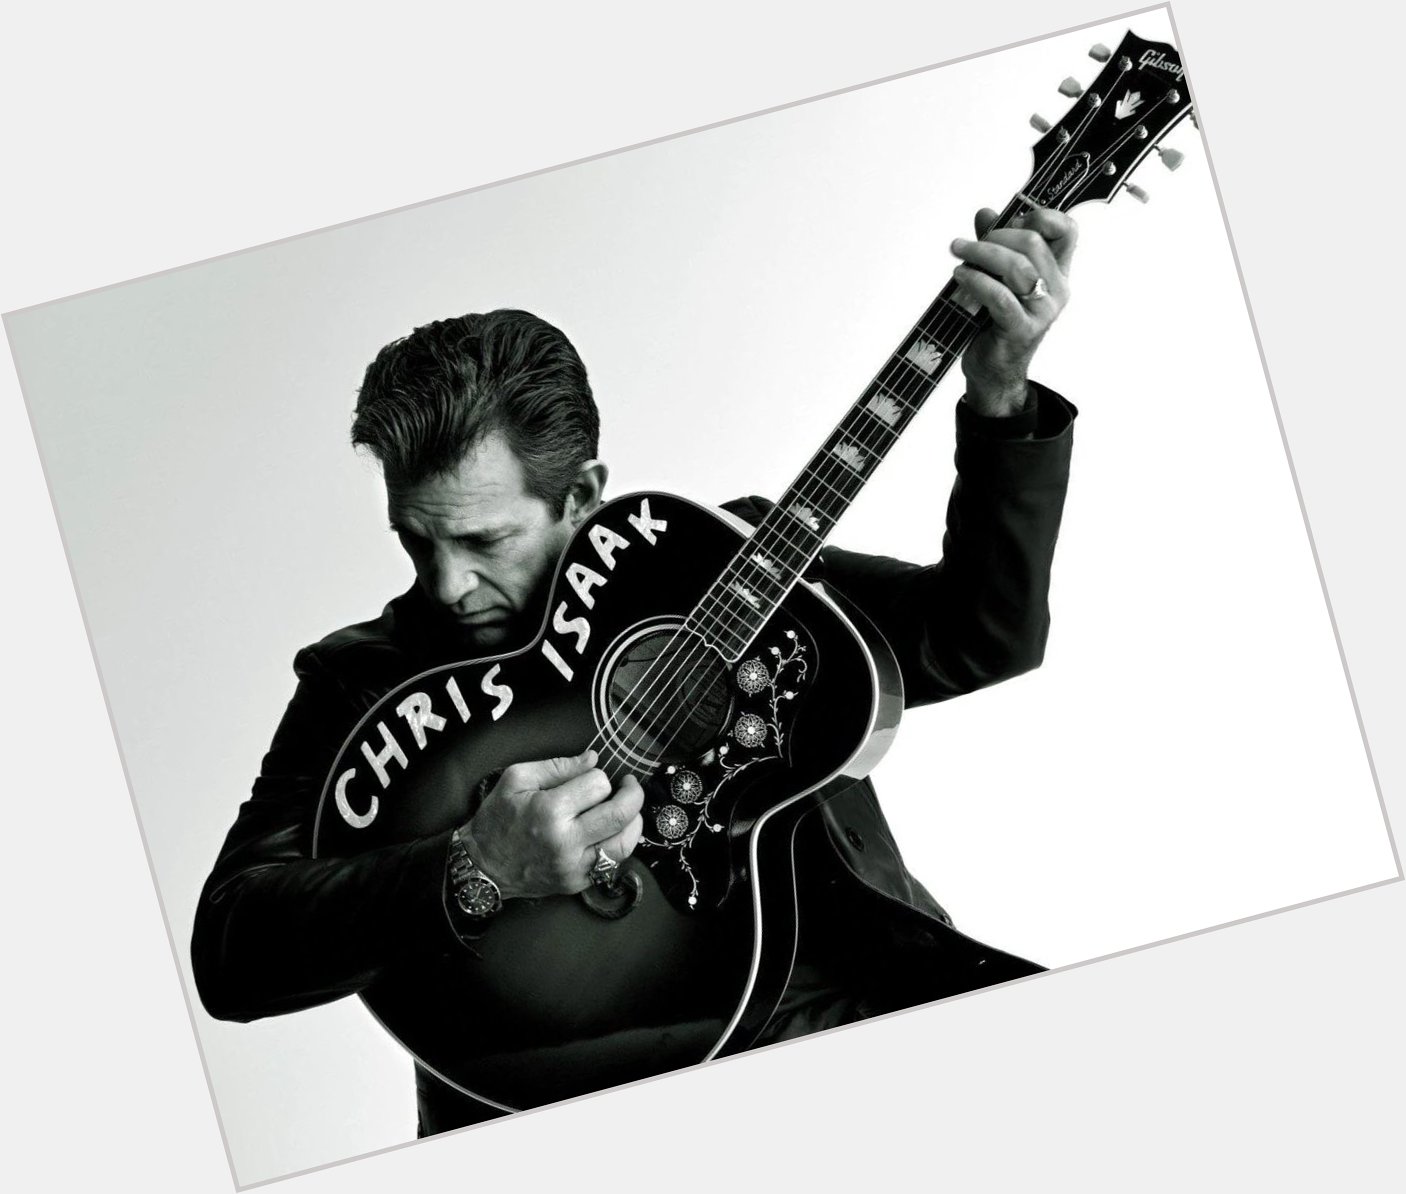 Happy birthday to American musician and actor Chris Isaak, born June 26, 1956. 